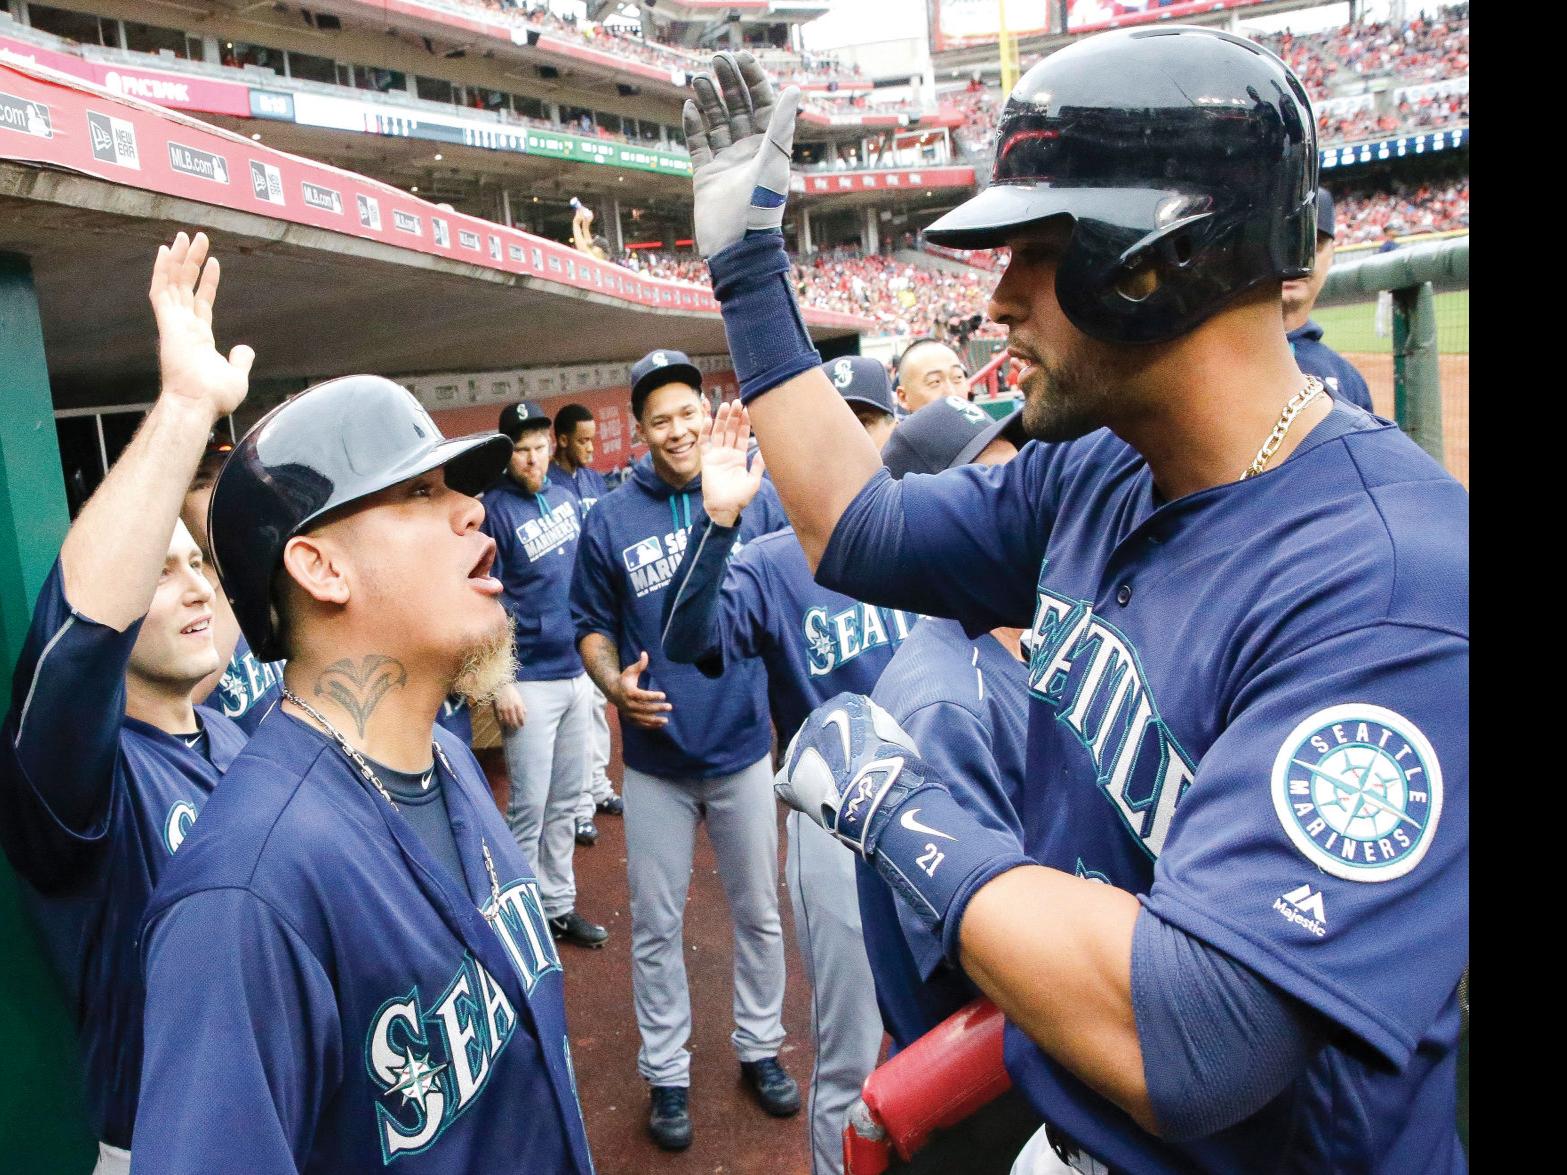 Nelson Cruz feels he 'came up short' by not seeing Mariners to